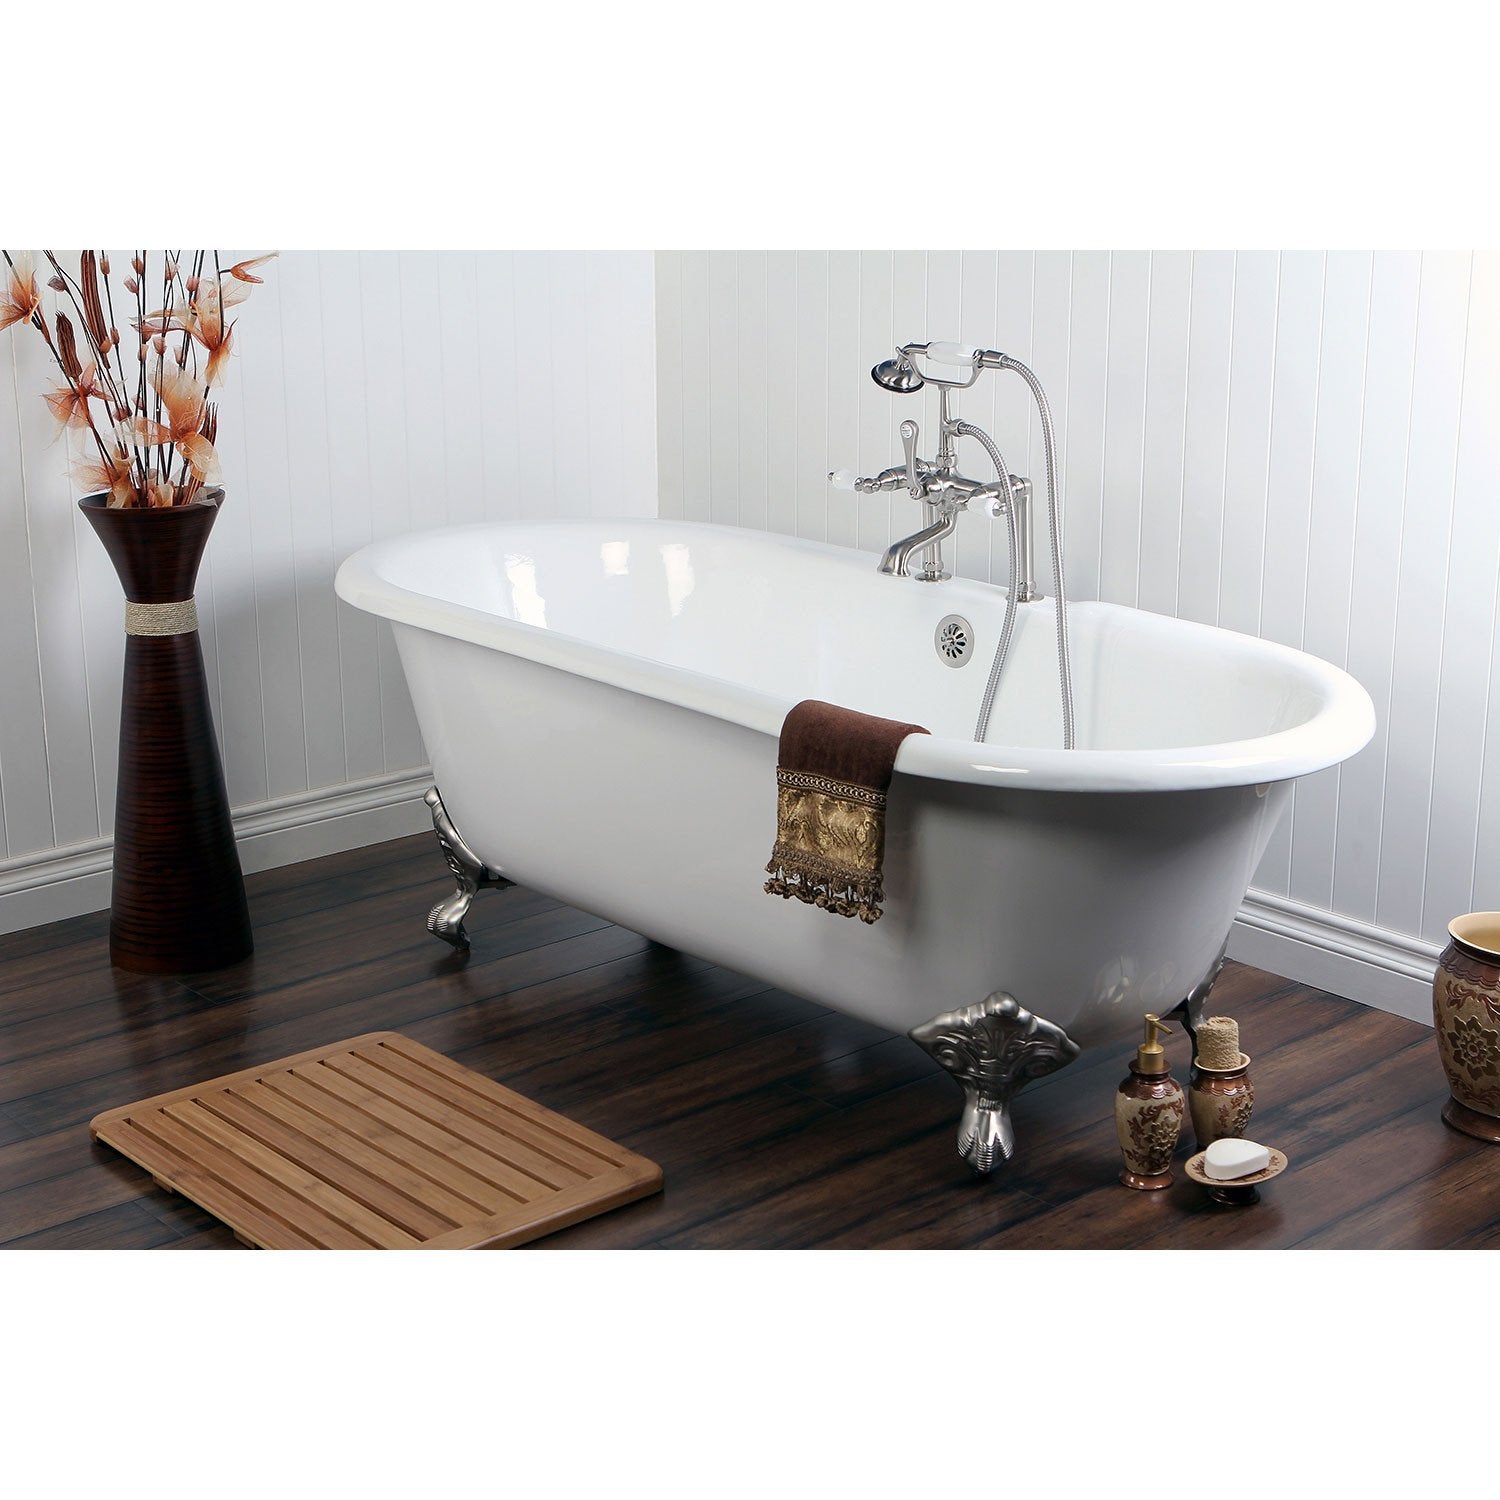 66" Cast Iron Claw Foot Tub w/ Satin Nickel Tub Faucet & Hardware Package CTP16